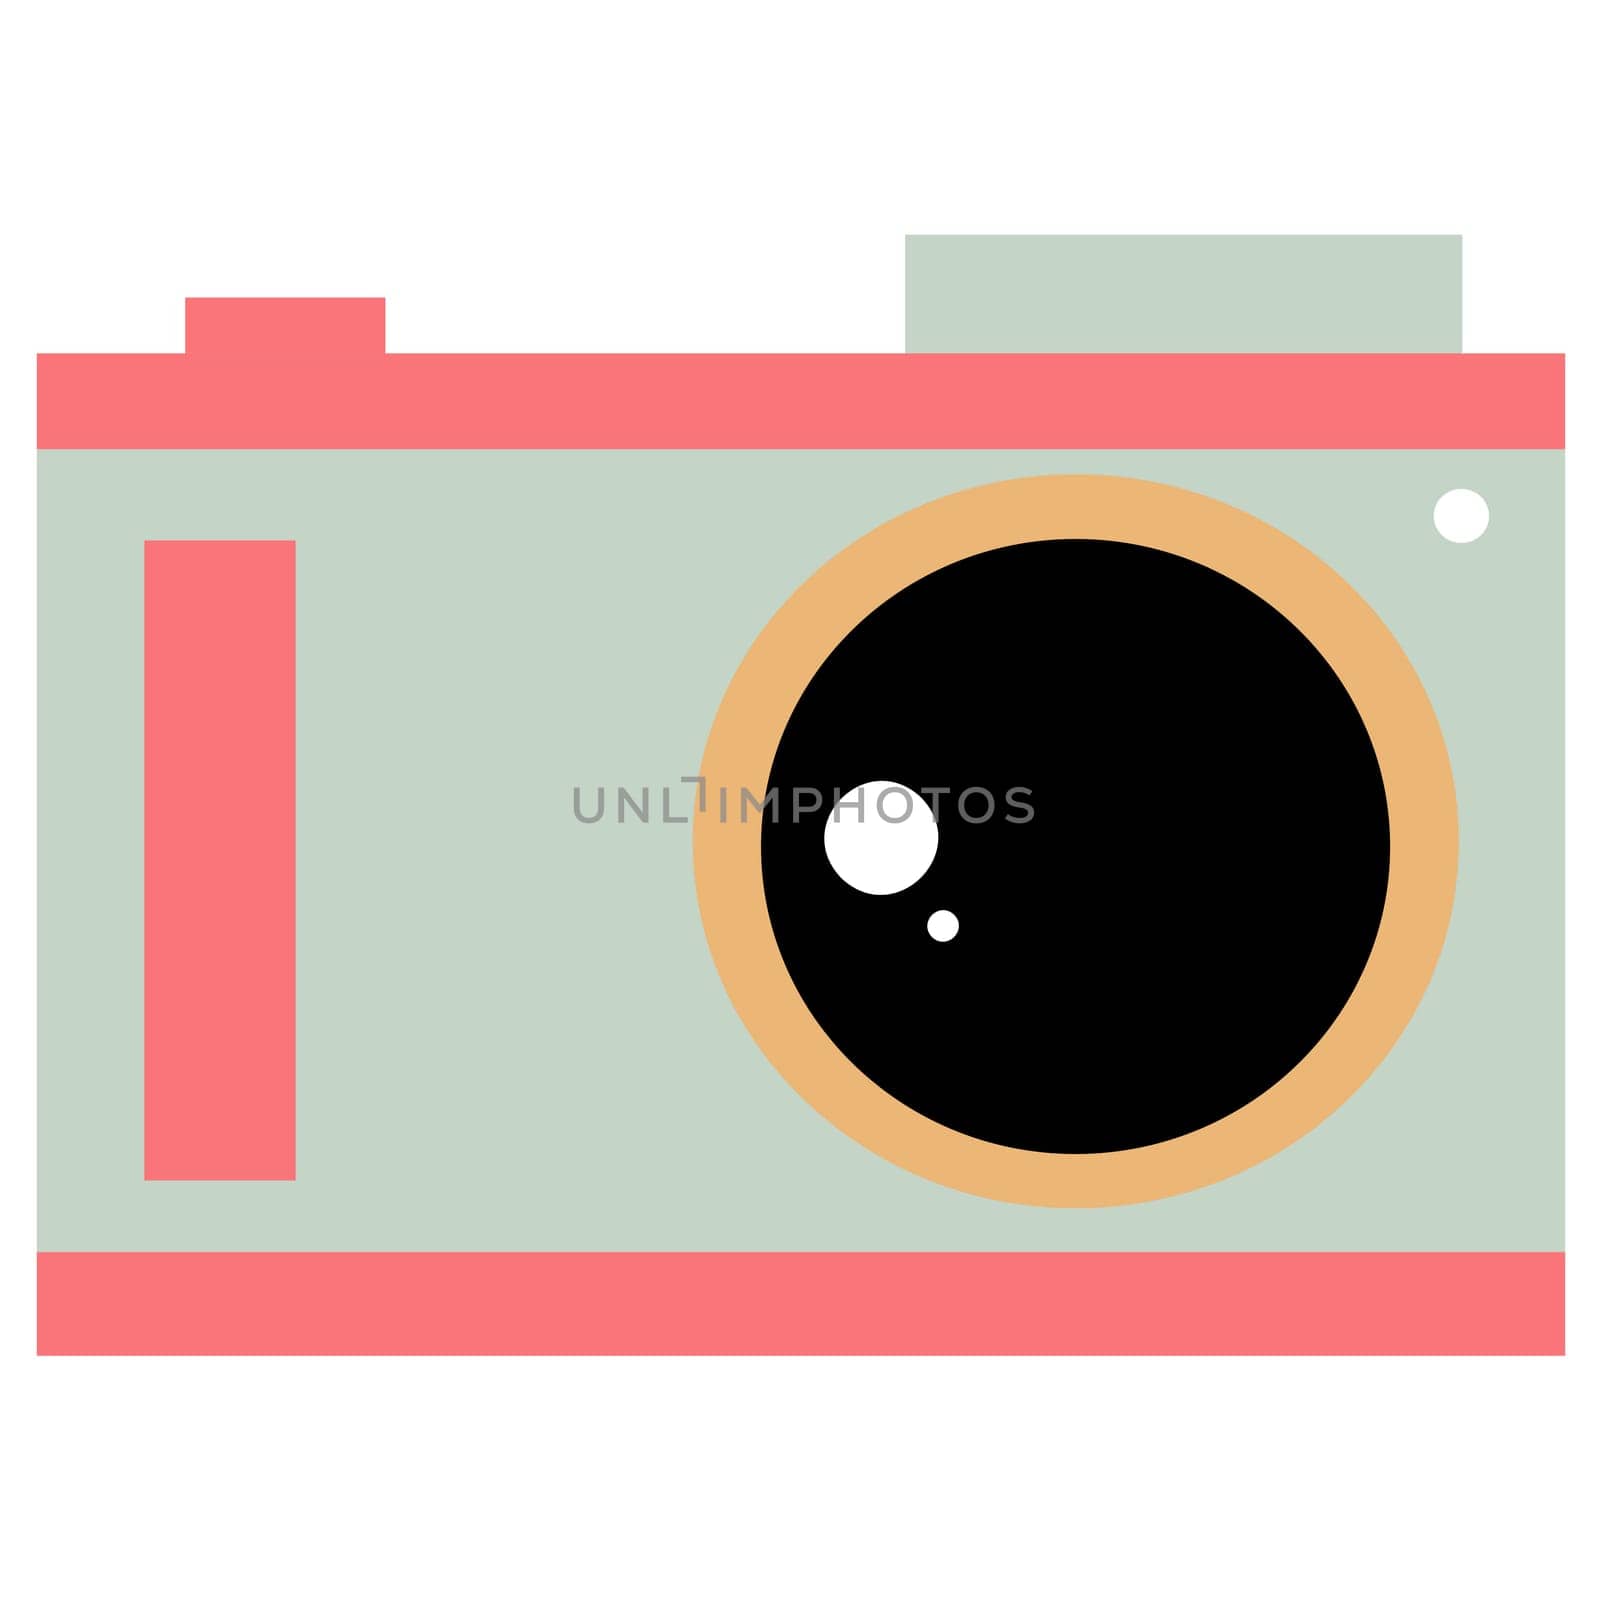 Drawing of vintage camera isolated on white background for usage as an illustration and a decorative element